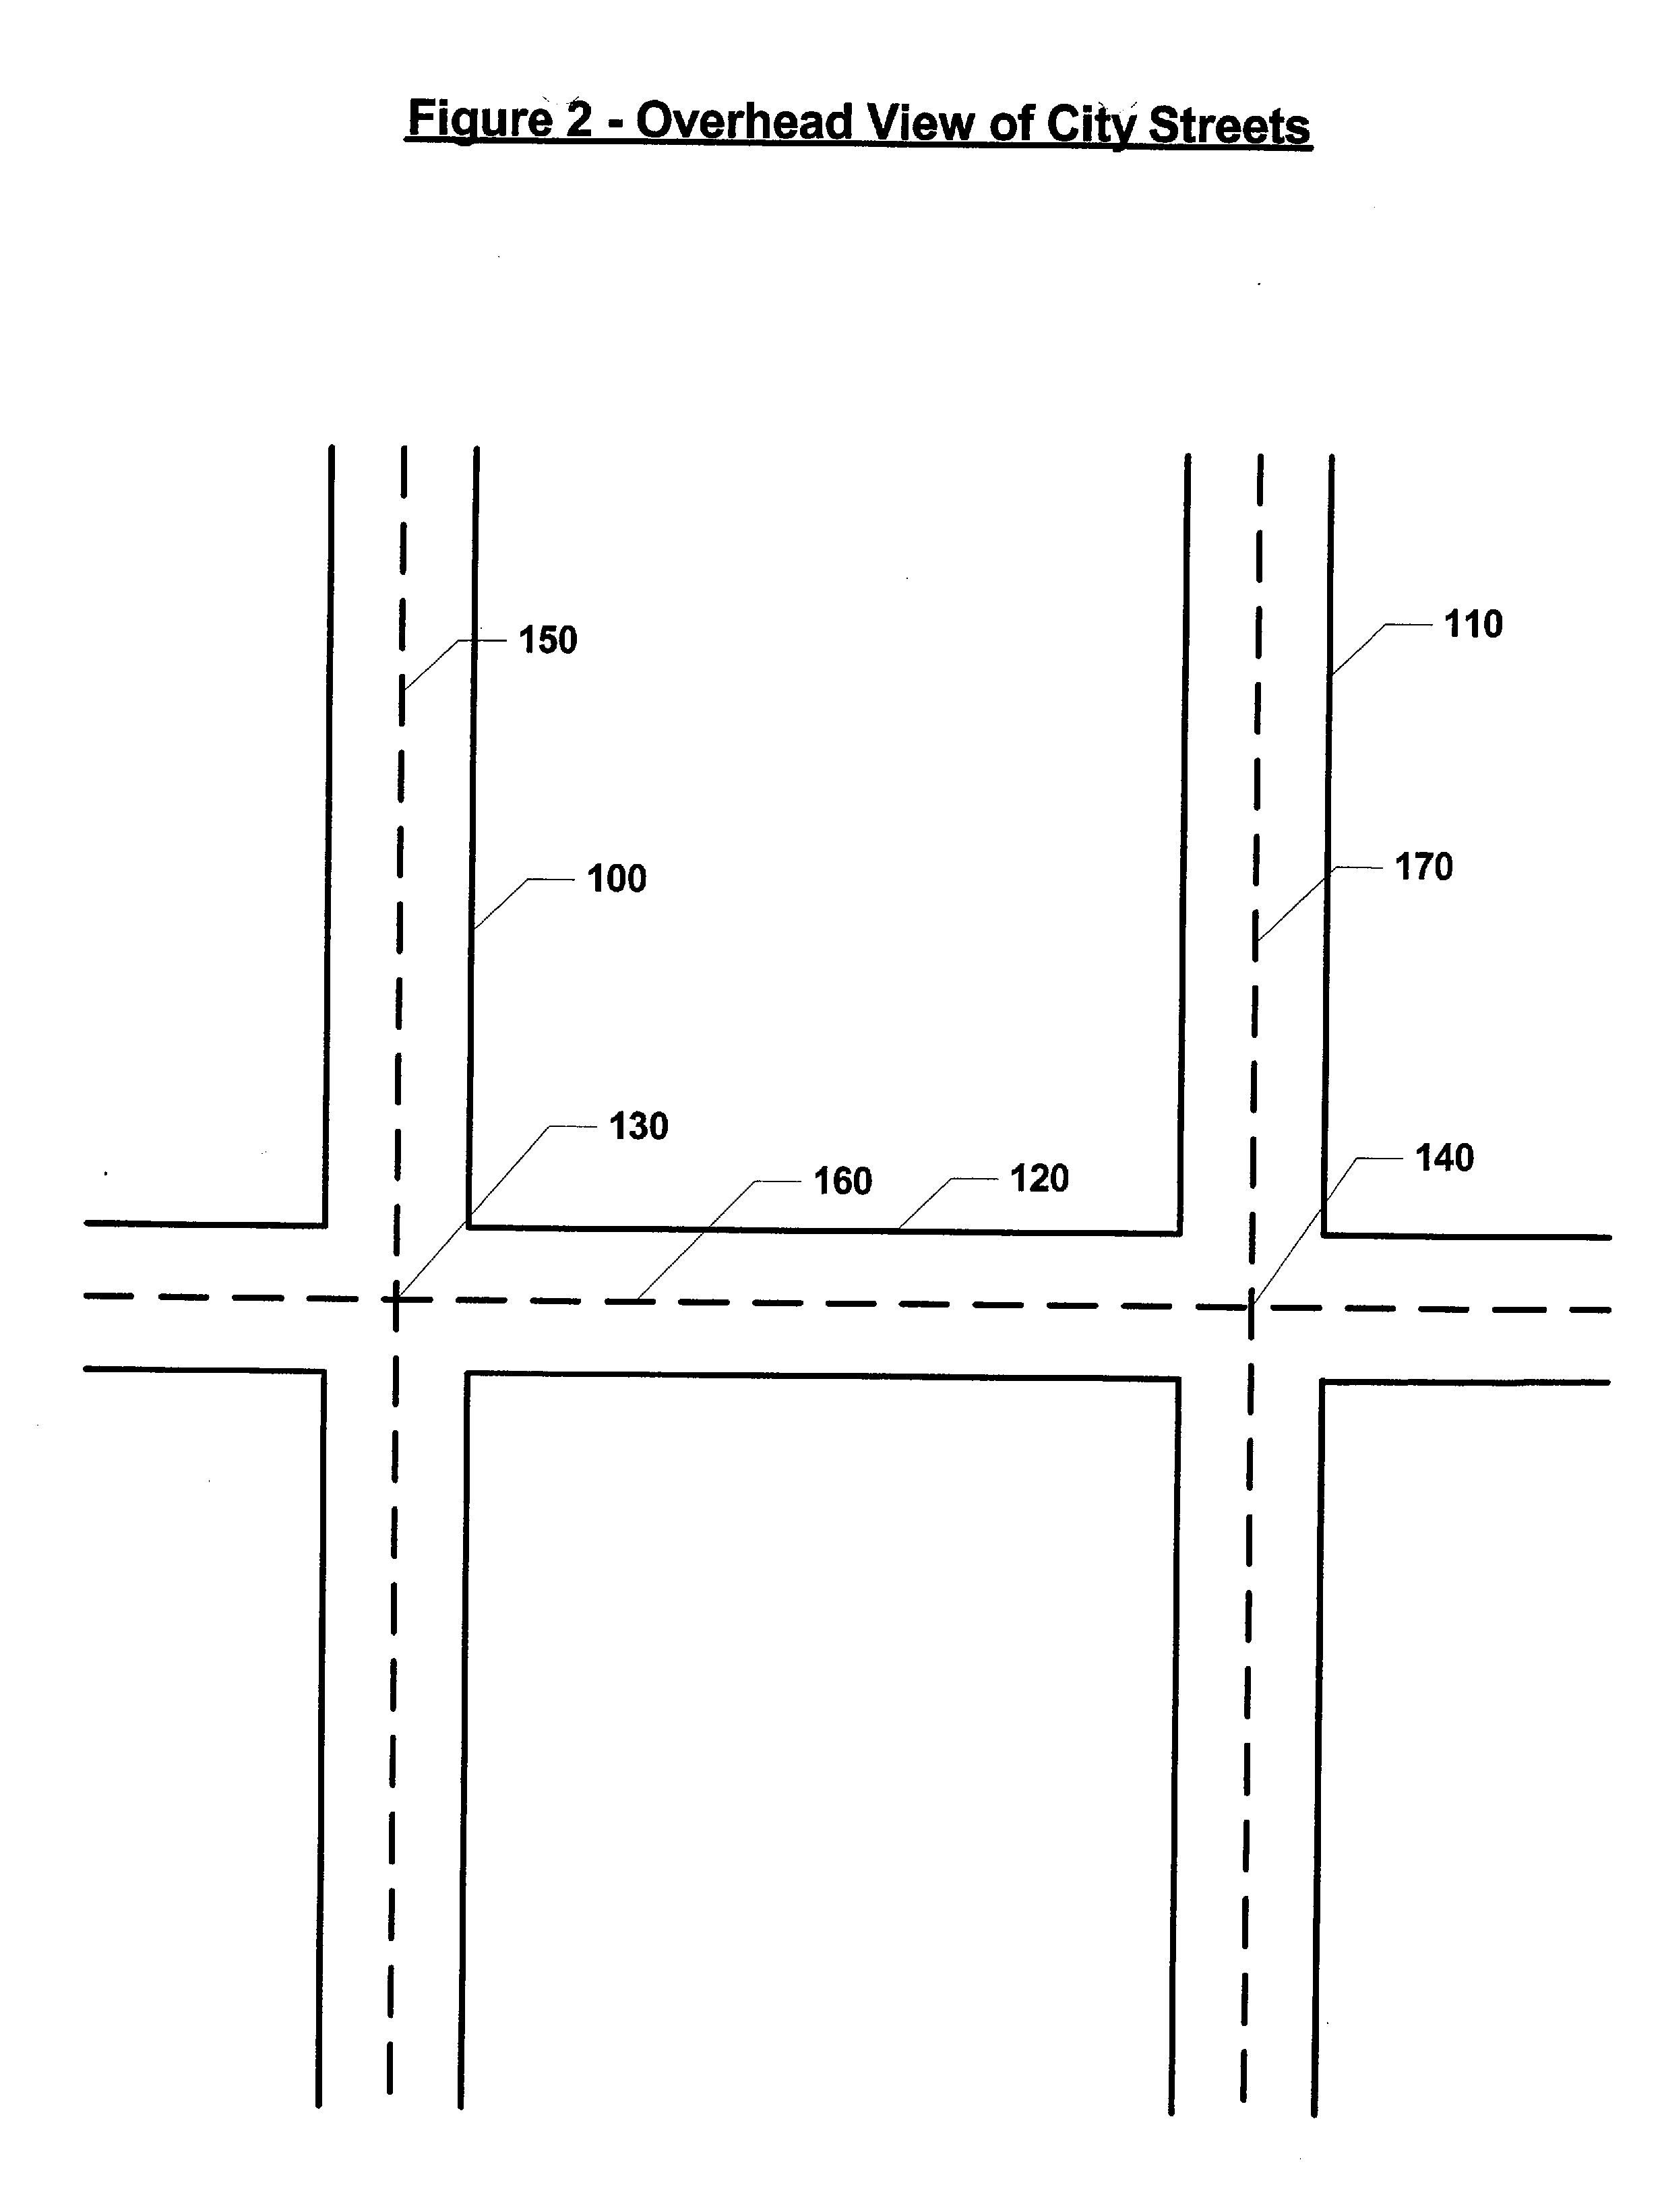 System for associating pre-recorded images with routing information in a navigation system